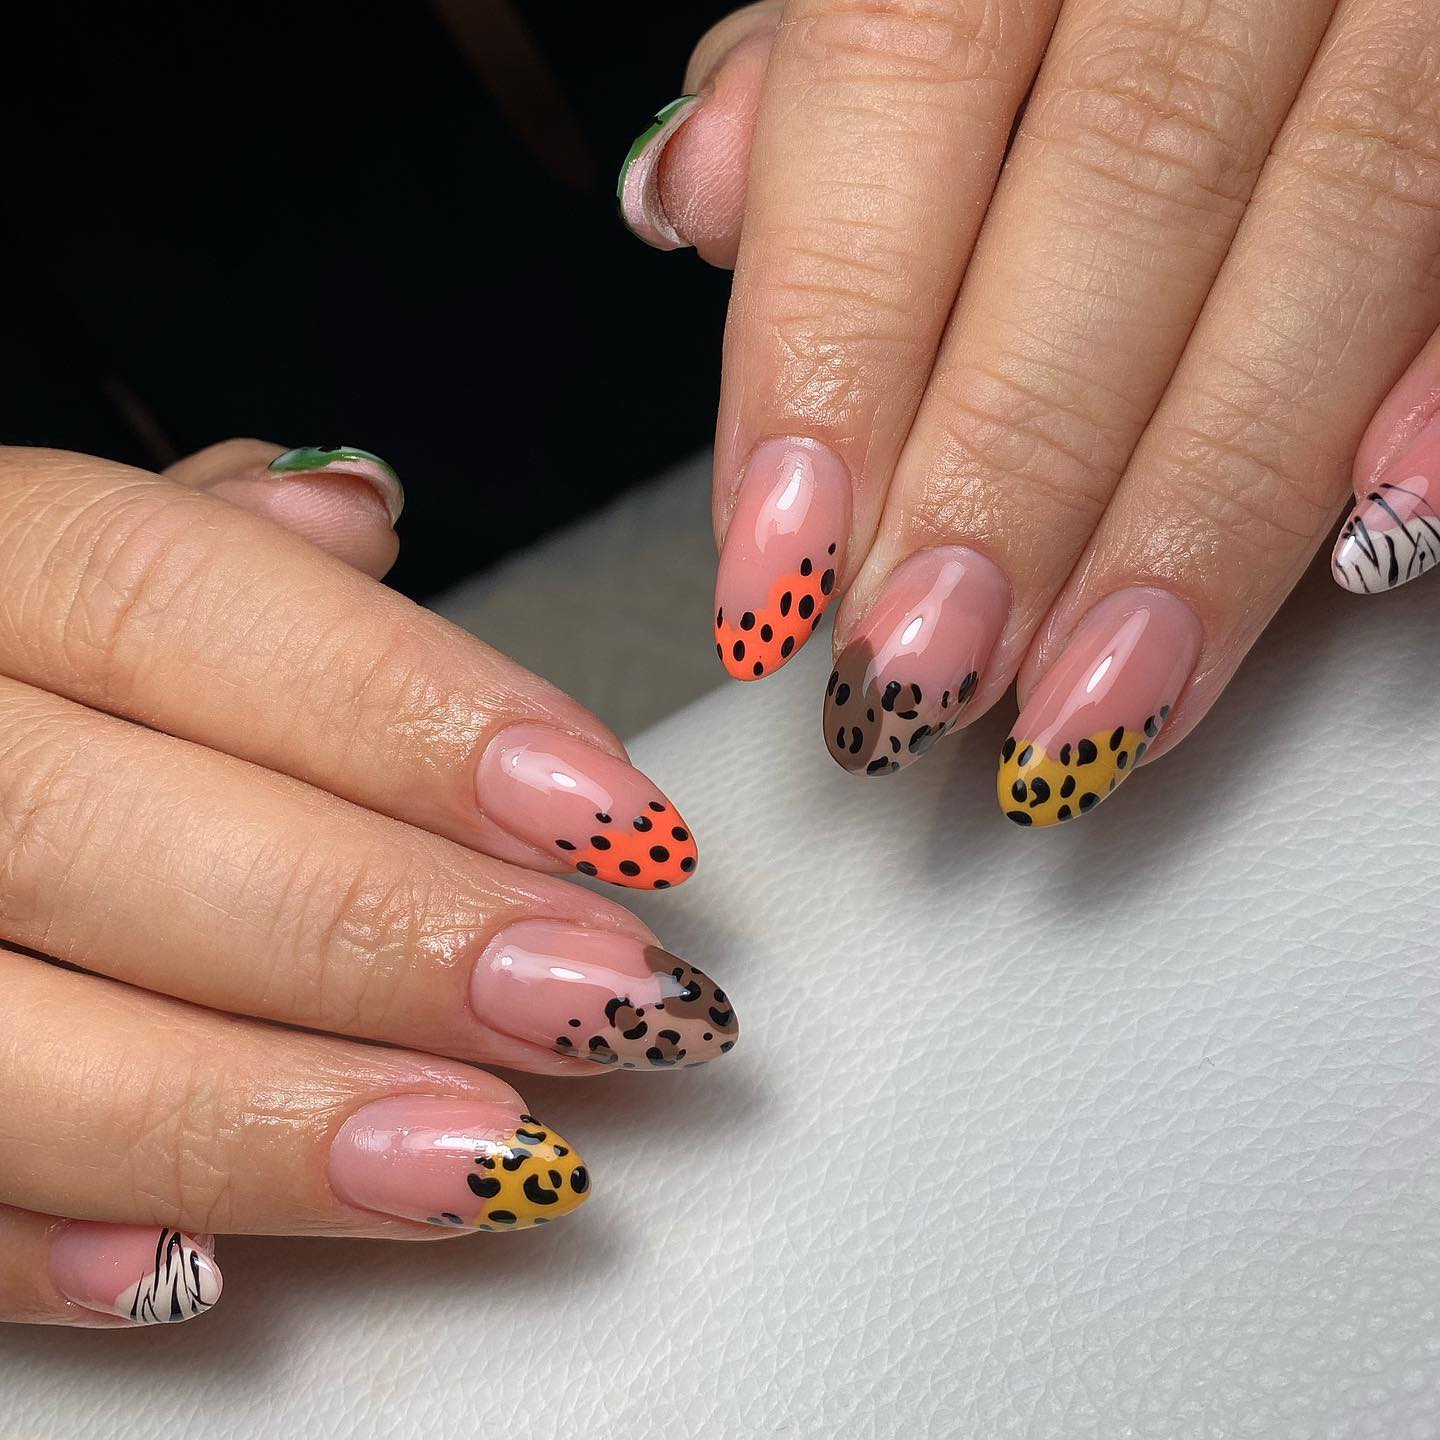 Round Nails with Animal Print Design